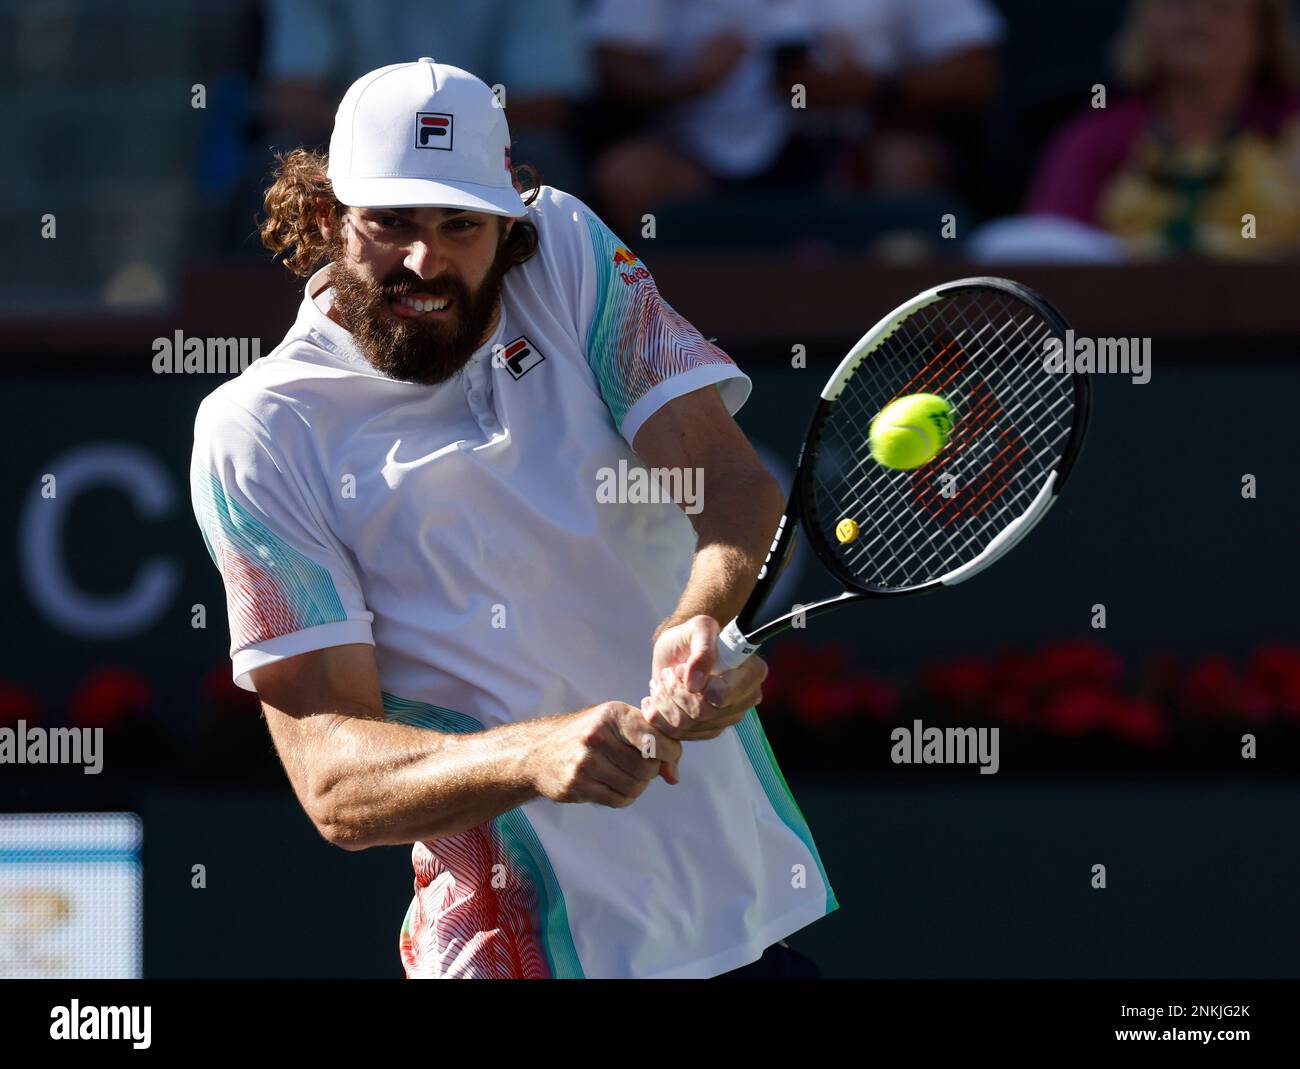 March 14, 2022 Reilly Opelka returns a shot against Denis Shapovalov of Canada during the 2022 BNP Paribas Open at Indian Wells Tennis Garden in Indian Wells, California